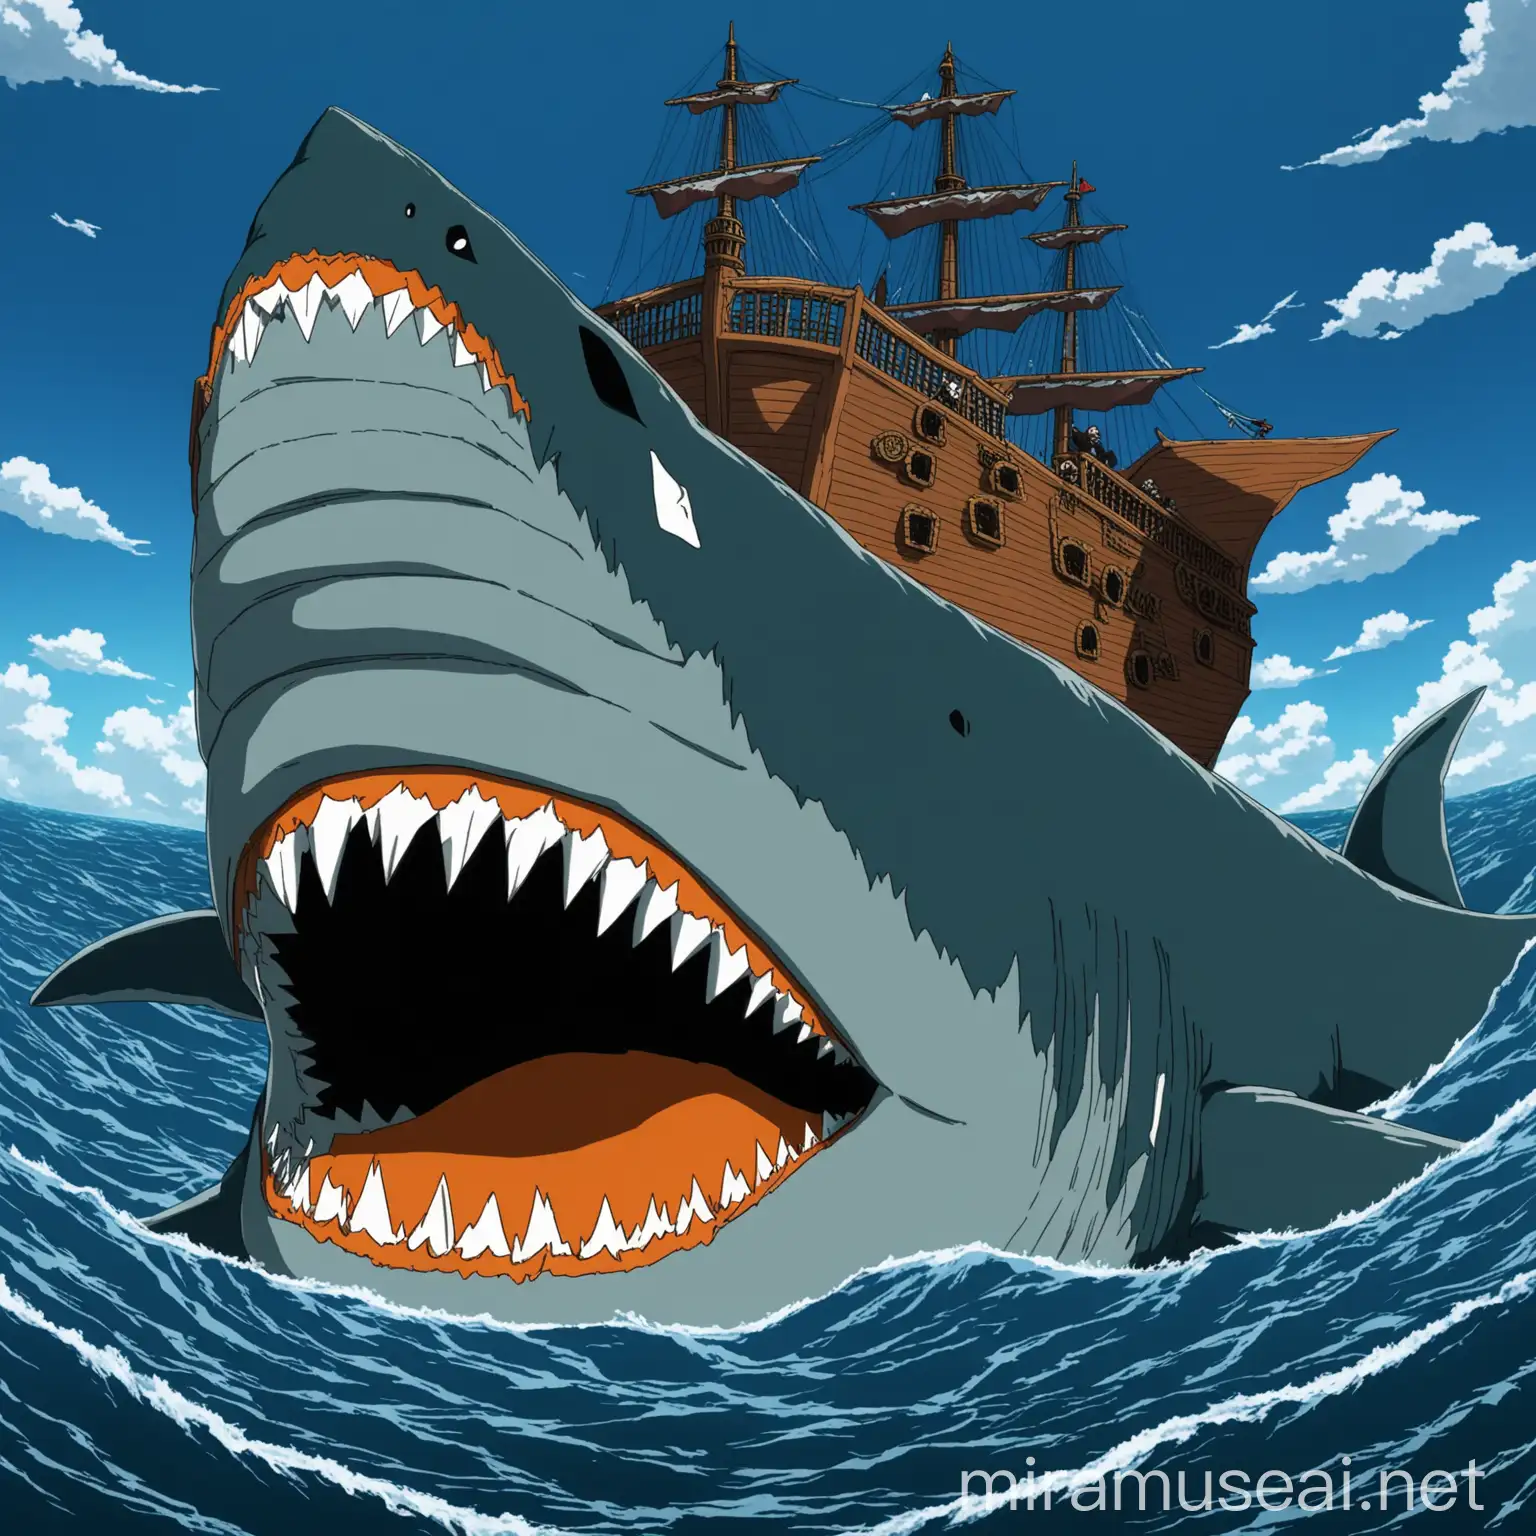 a giant orange megalodon acts as a pirate ship, the megalodon has 3 eyes. in an ocean. in anime
